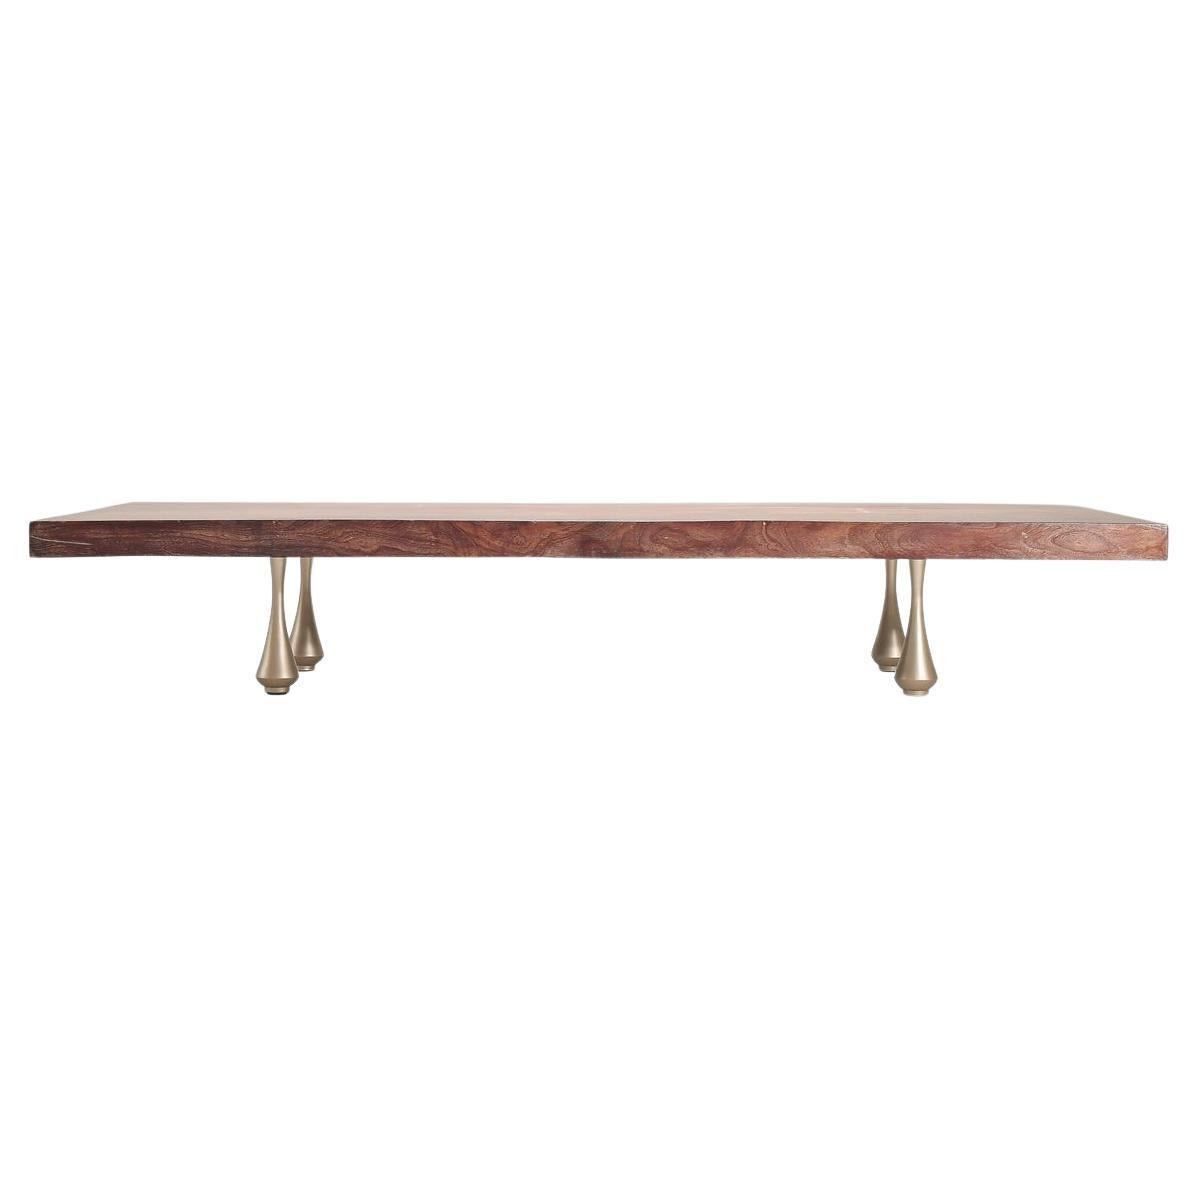 Bespoke Antique Single Slab Coffee Table, Sand Cast Brass Base by P. Tendercool For Sale